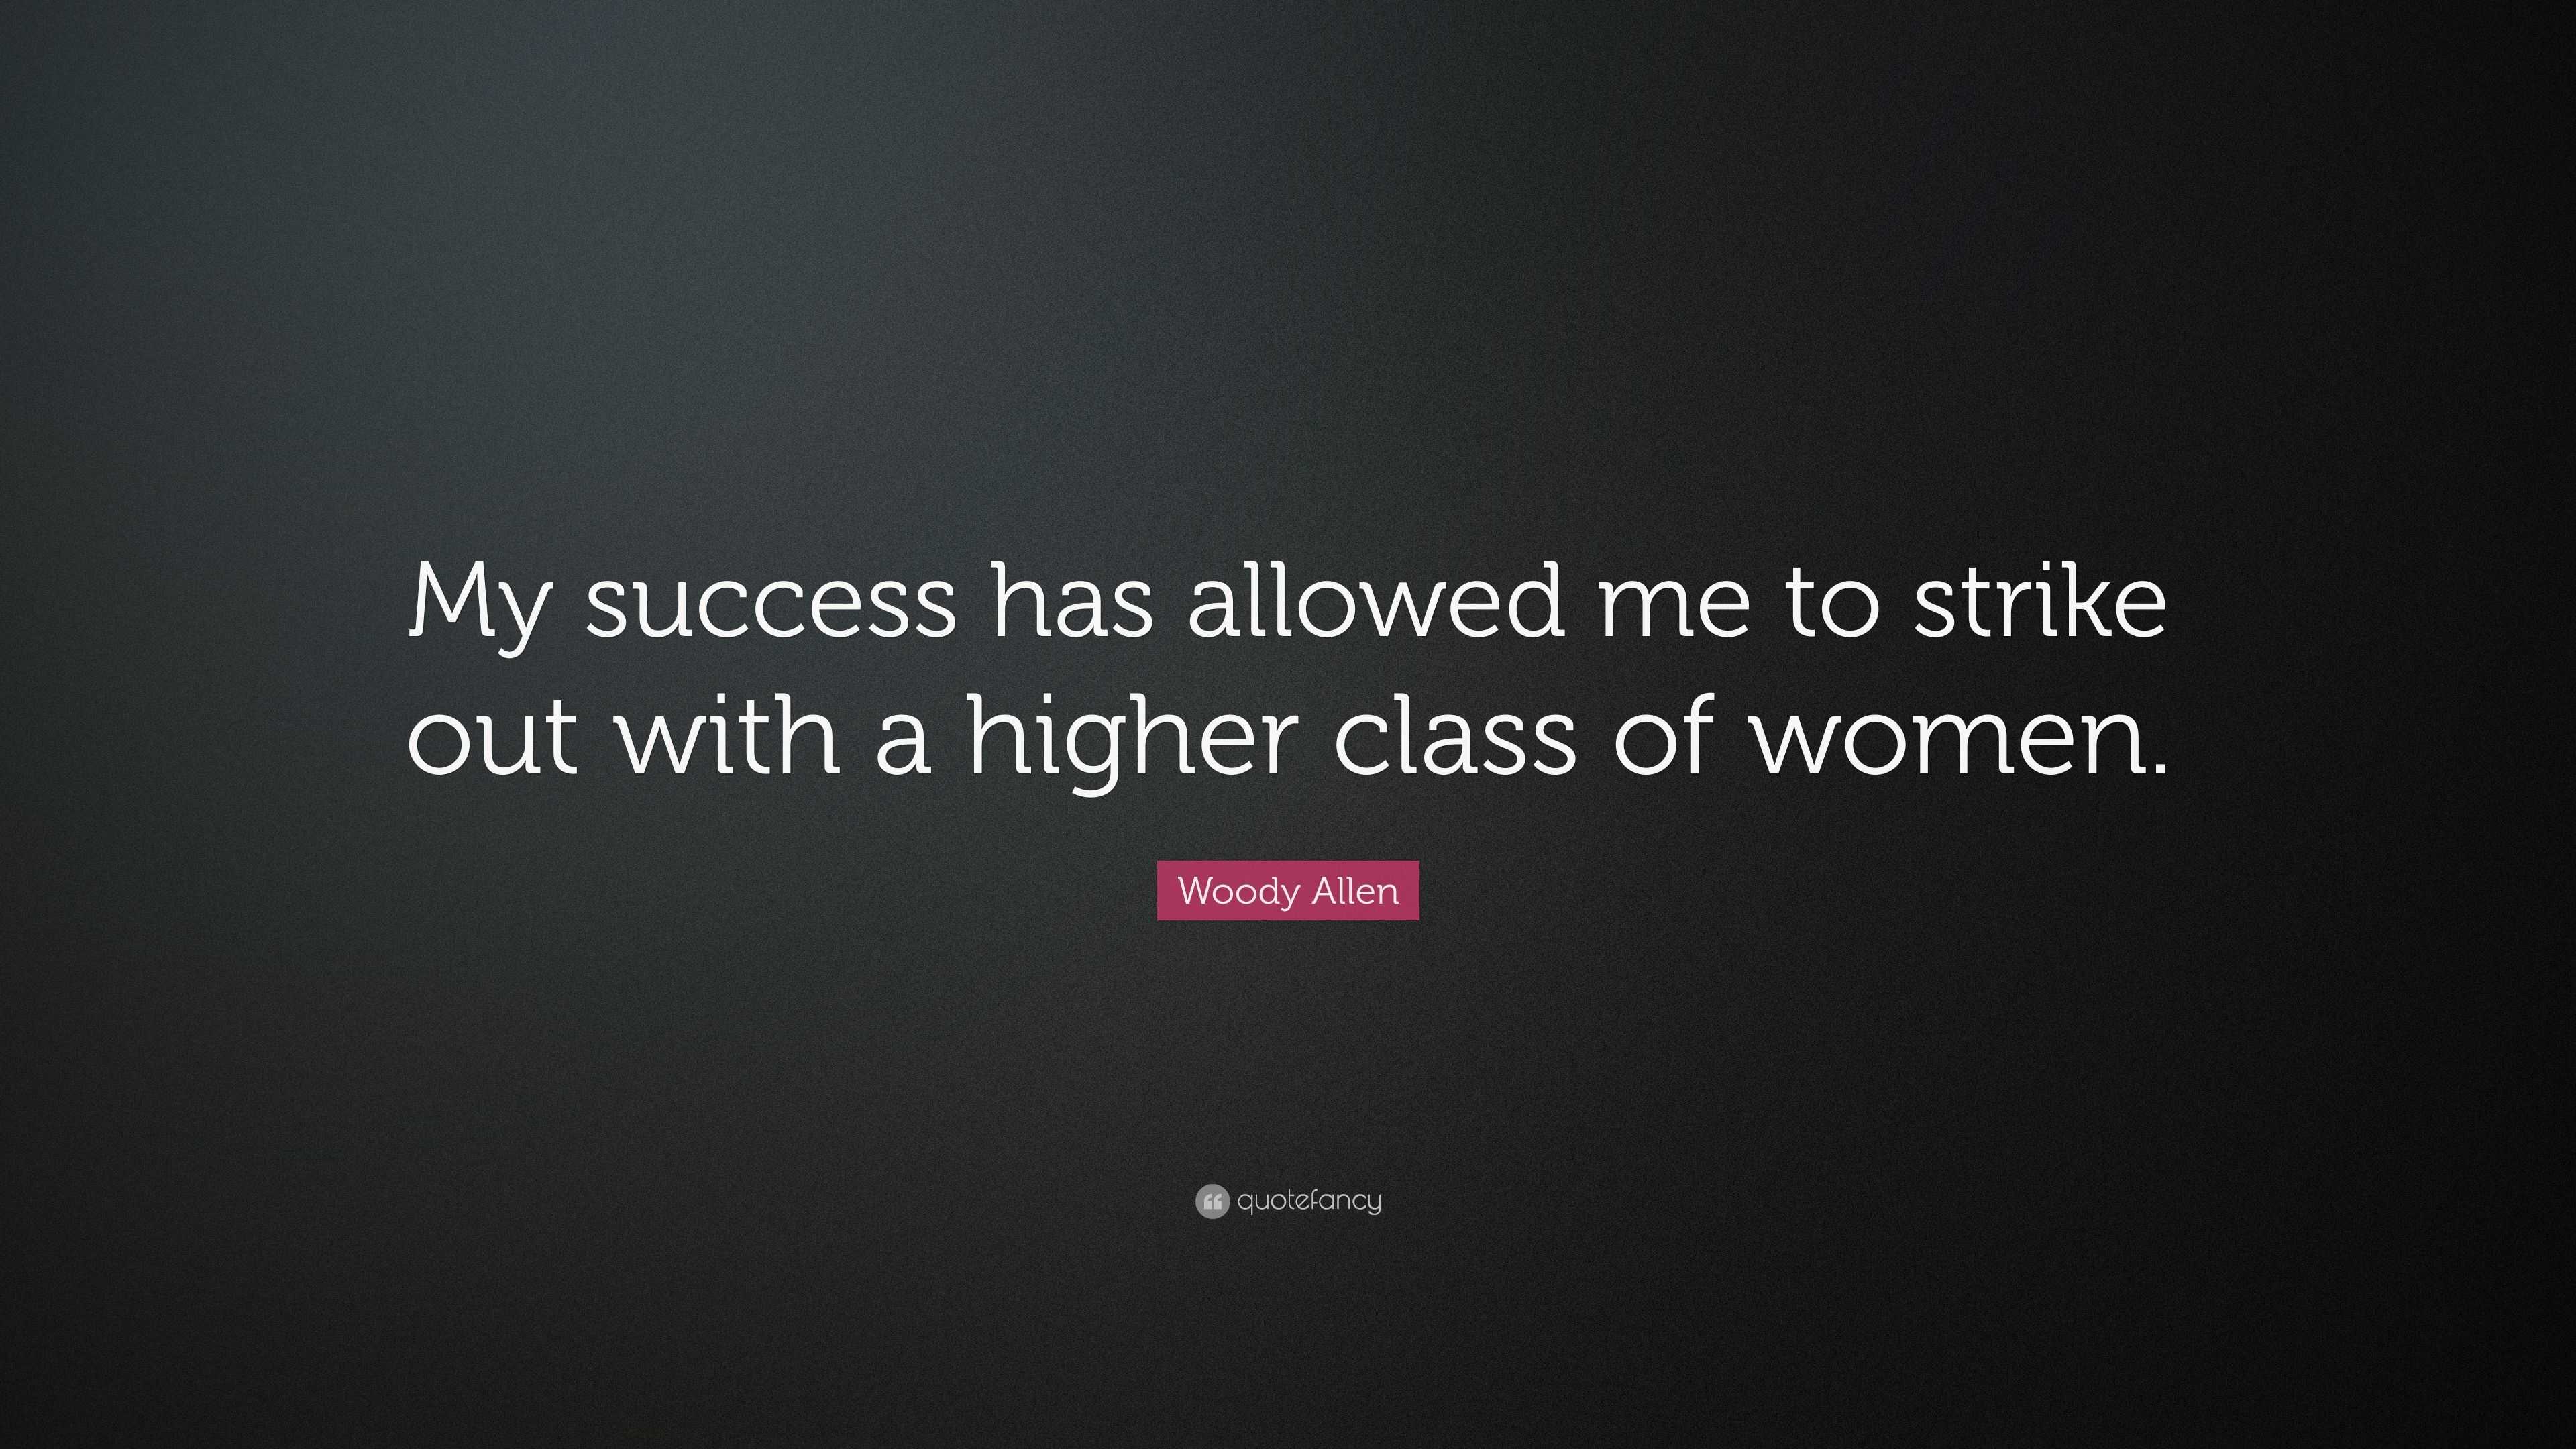 Woody Allen Quote: “My success has allowed me to strike out with a ...